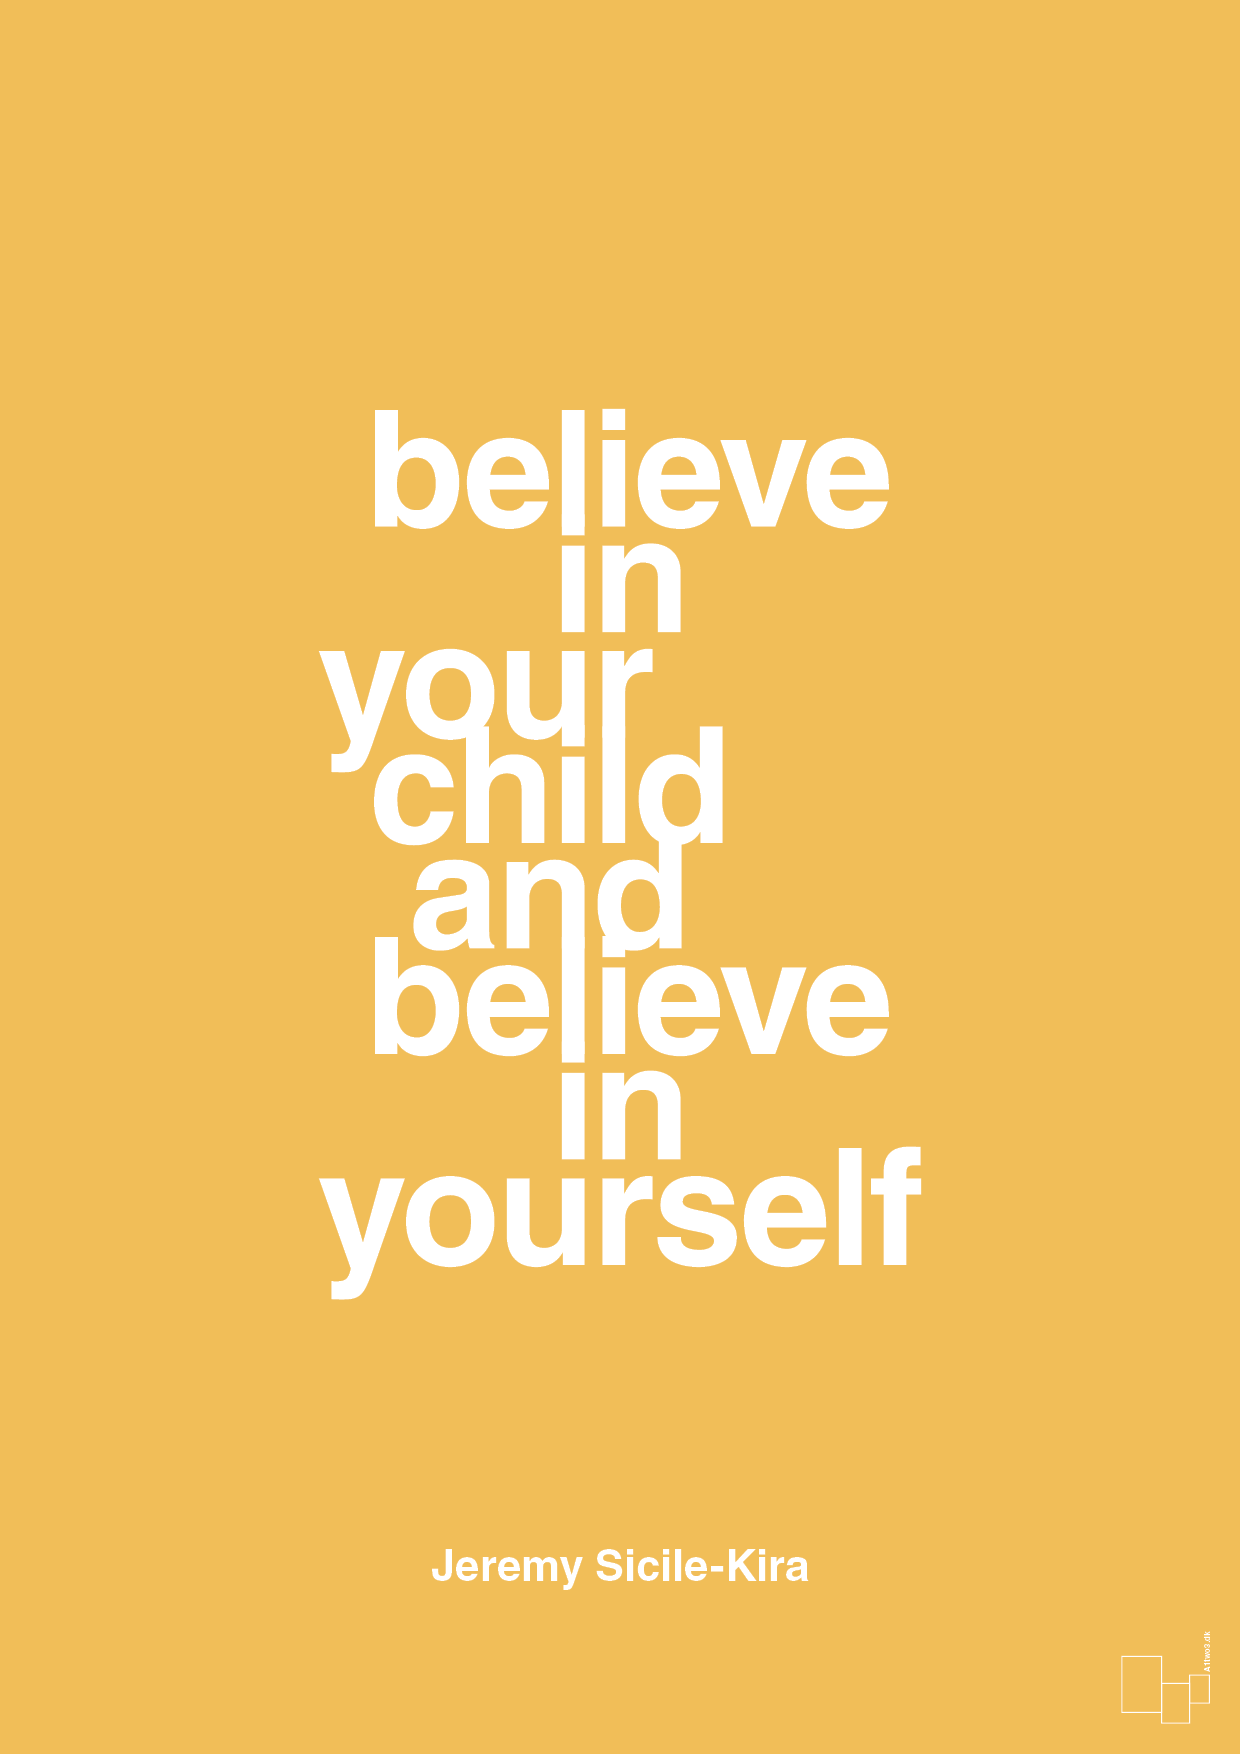 believe in your child and believe in yourself - Plakat med Samfund i Honeycomb